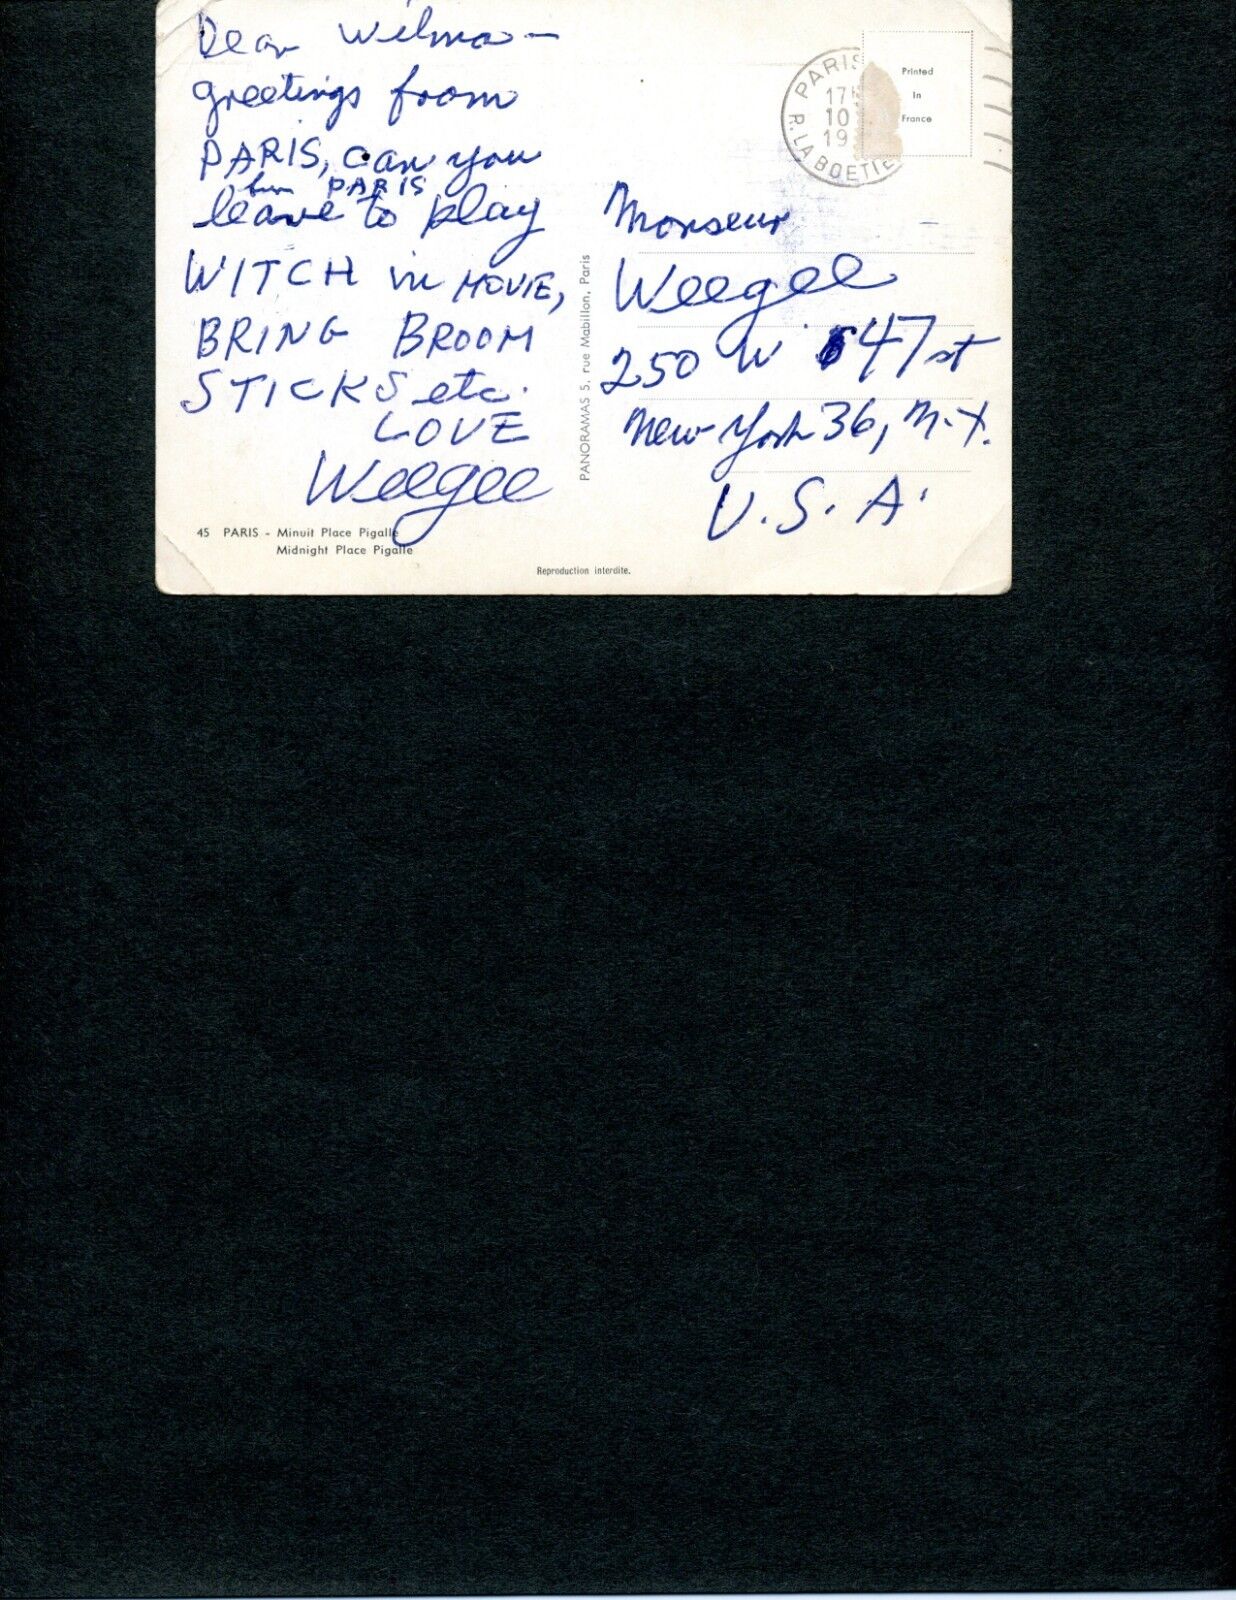 WEEGEE (ARTHUR FELLIG) HANDWRITTEN NOTE SIGNED TWICE ABOUT MOVIE ROLE, PHOTO